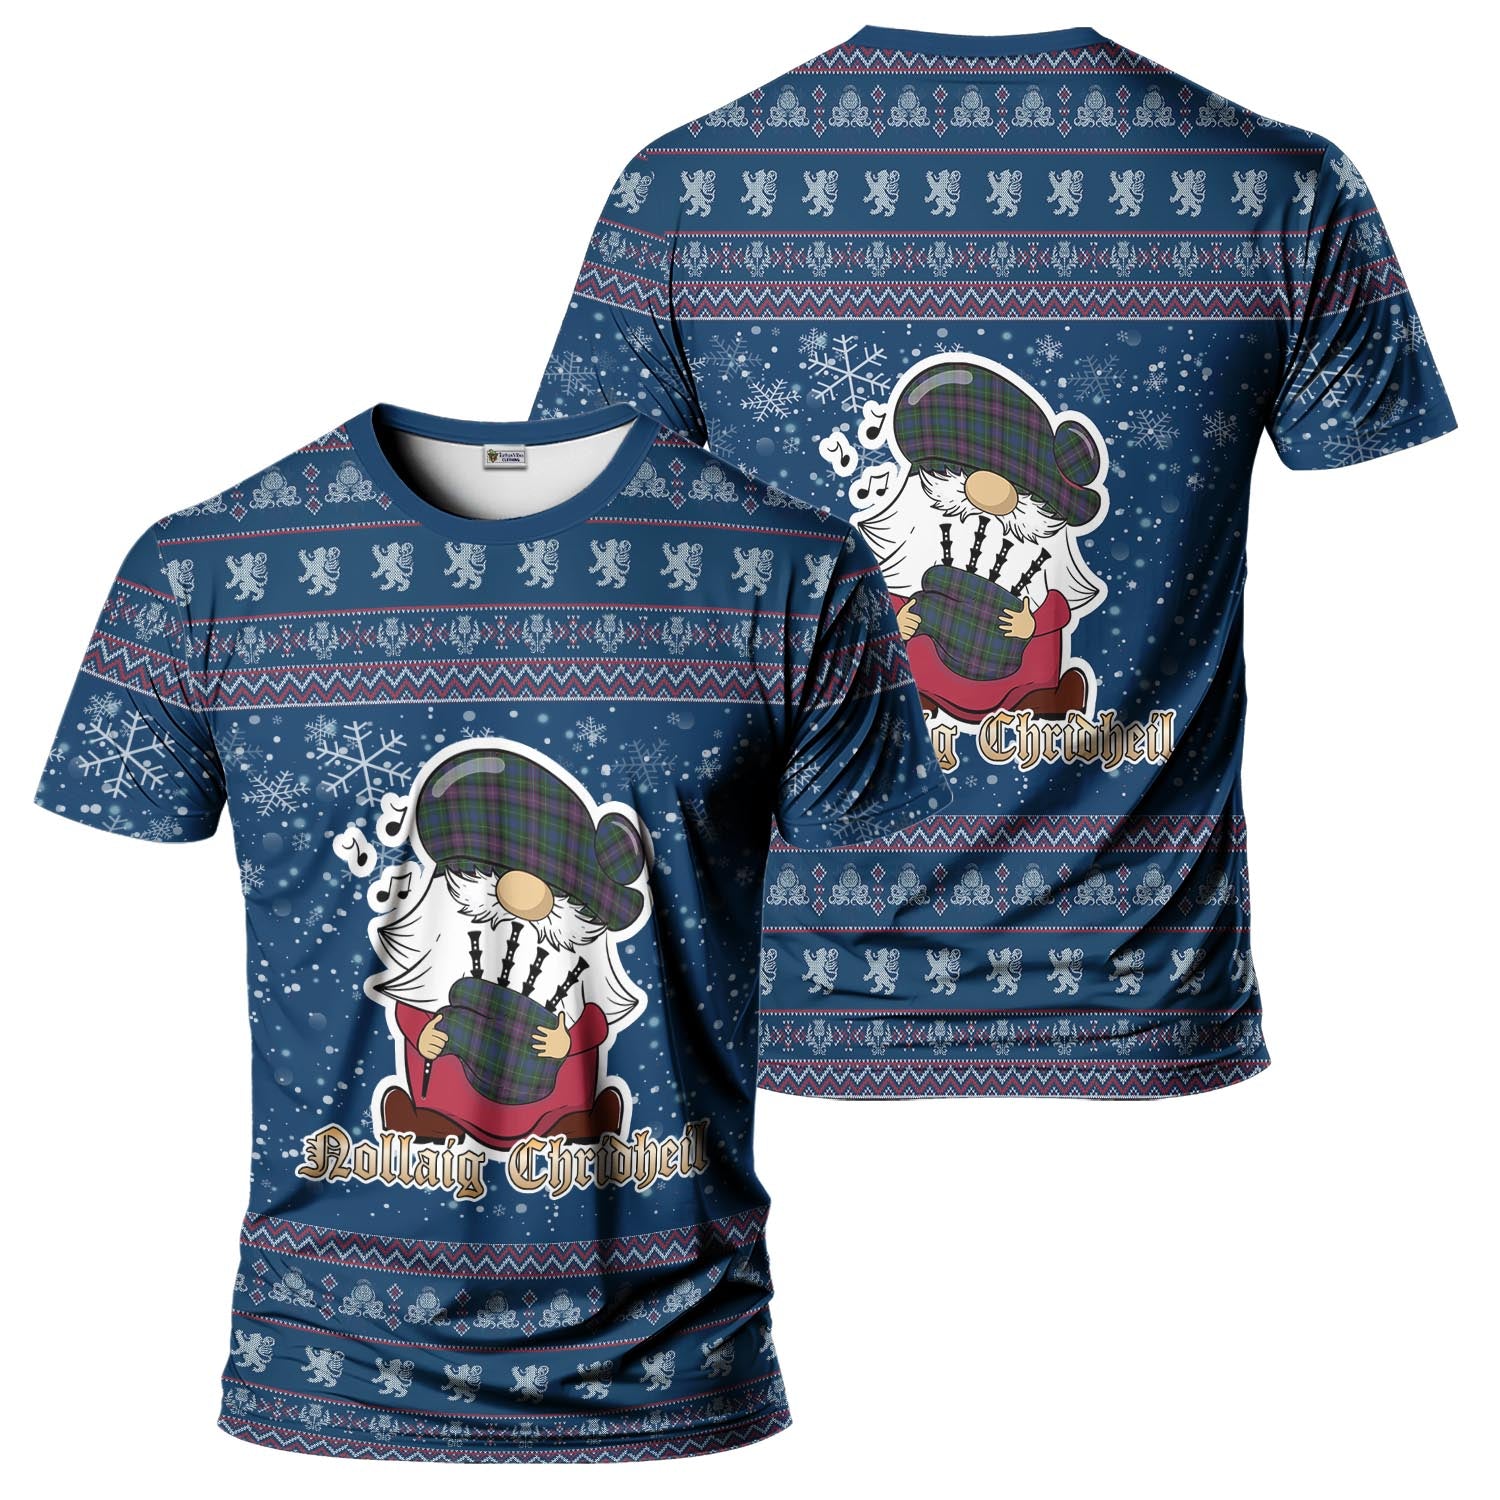 Rankin Clan Christmas Family T-Shirt with Funny Gnome Playing Bagpipes Kid's Shirt Blue - Tartanvibesclothing